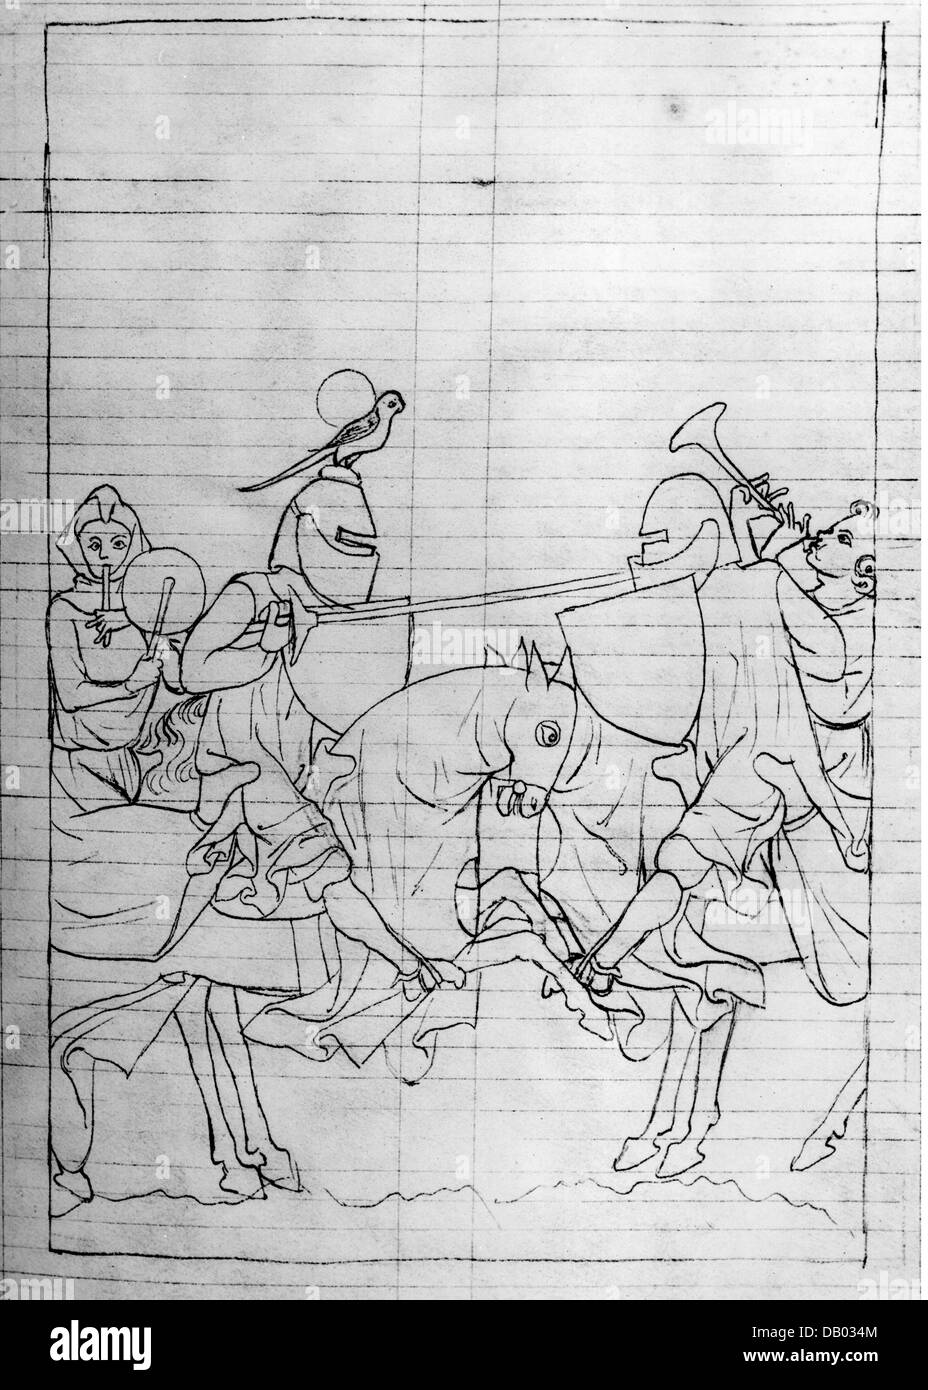 Middle Ages, knights, joust, sketch from the Codex Manesse, 14th century, sketch, sketches, illumination, illuminations, Middle Ages, medieval, mediaeval, knight's armour, knight's armor, art of painting, fine arts, art, musician, musicians, wind player, the wind, knights festival, helmets, helmet, military, lance, lances, historic, historical, people, Additional-Rights-Clearences-Not Available Stock Photo